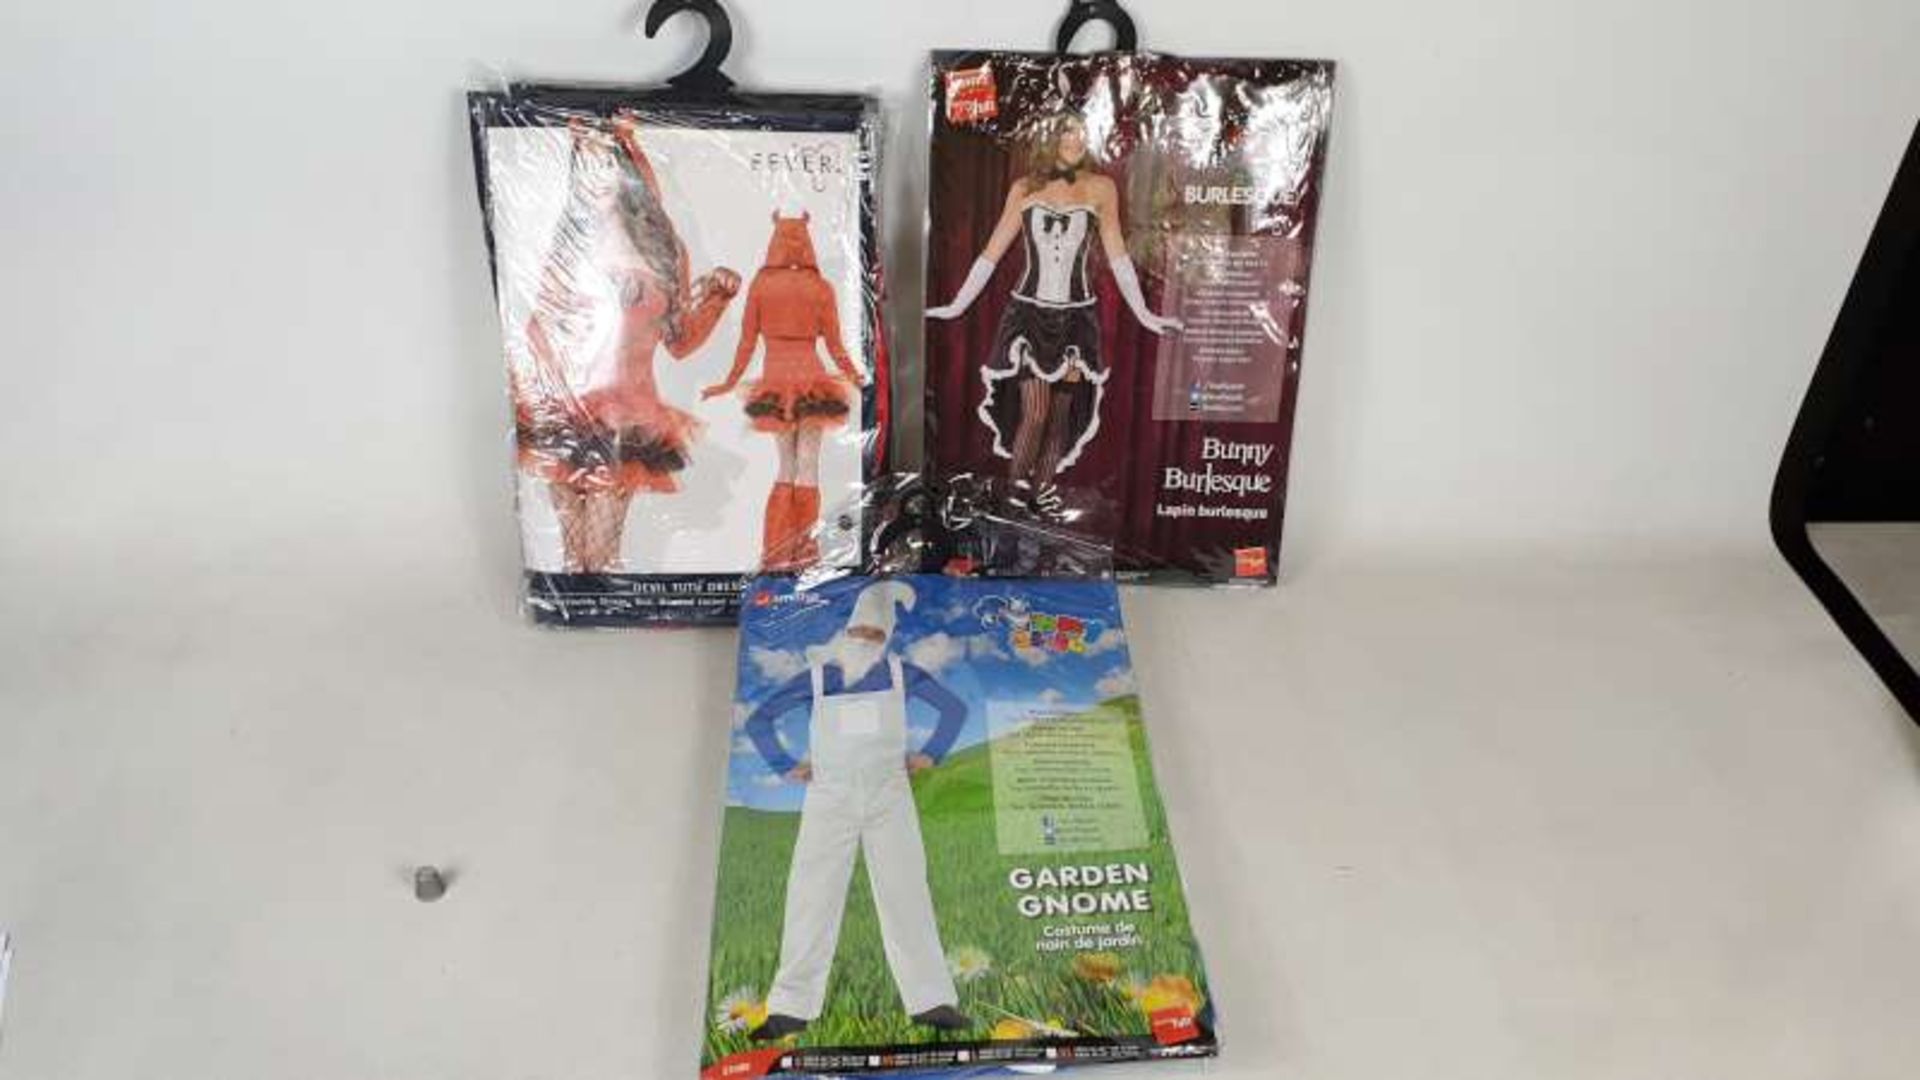 48 X SMIFFYS / FEVER FANCY DRESS COSTUMES IN 2 BOXES